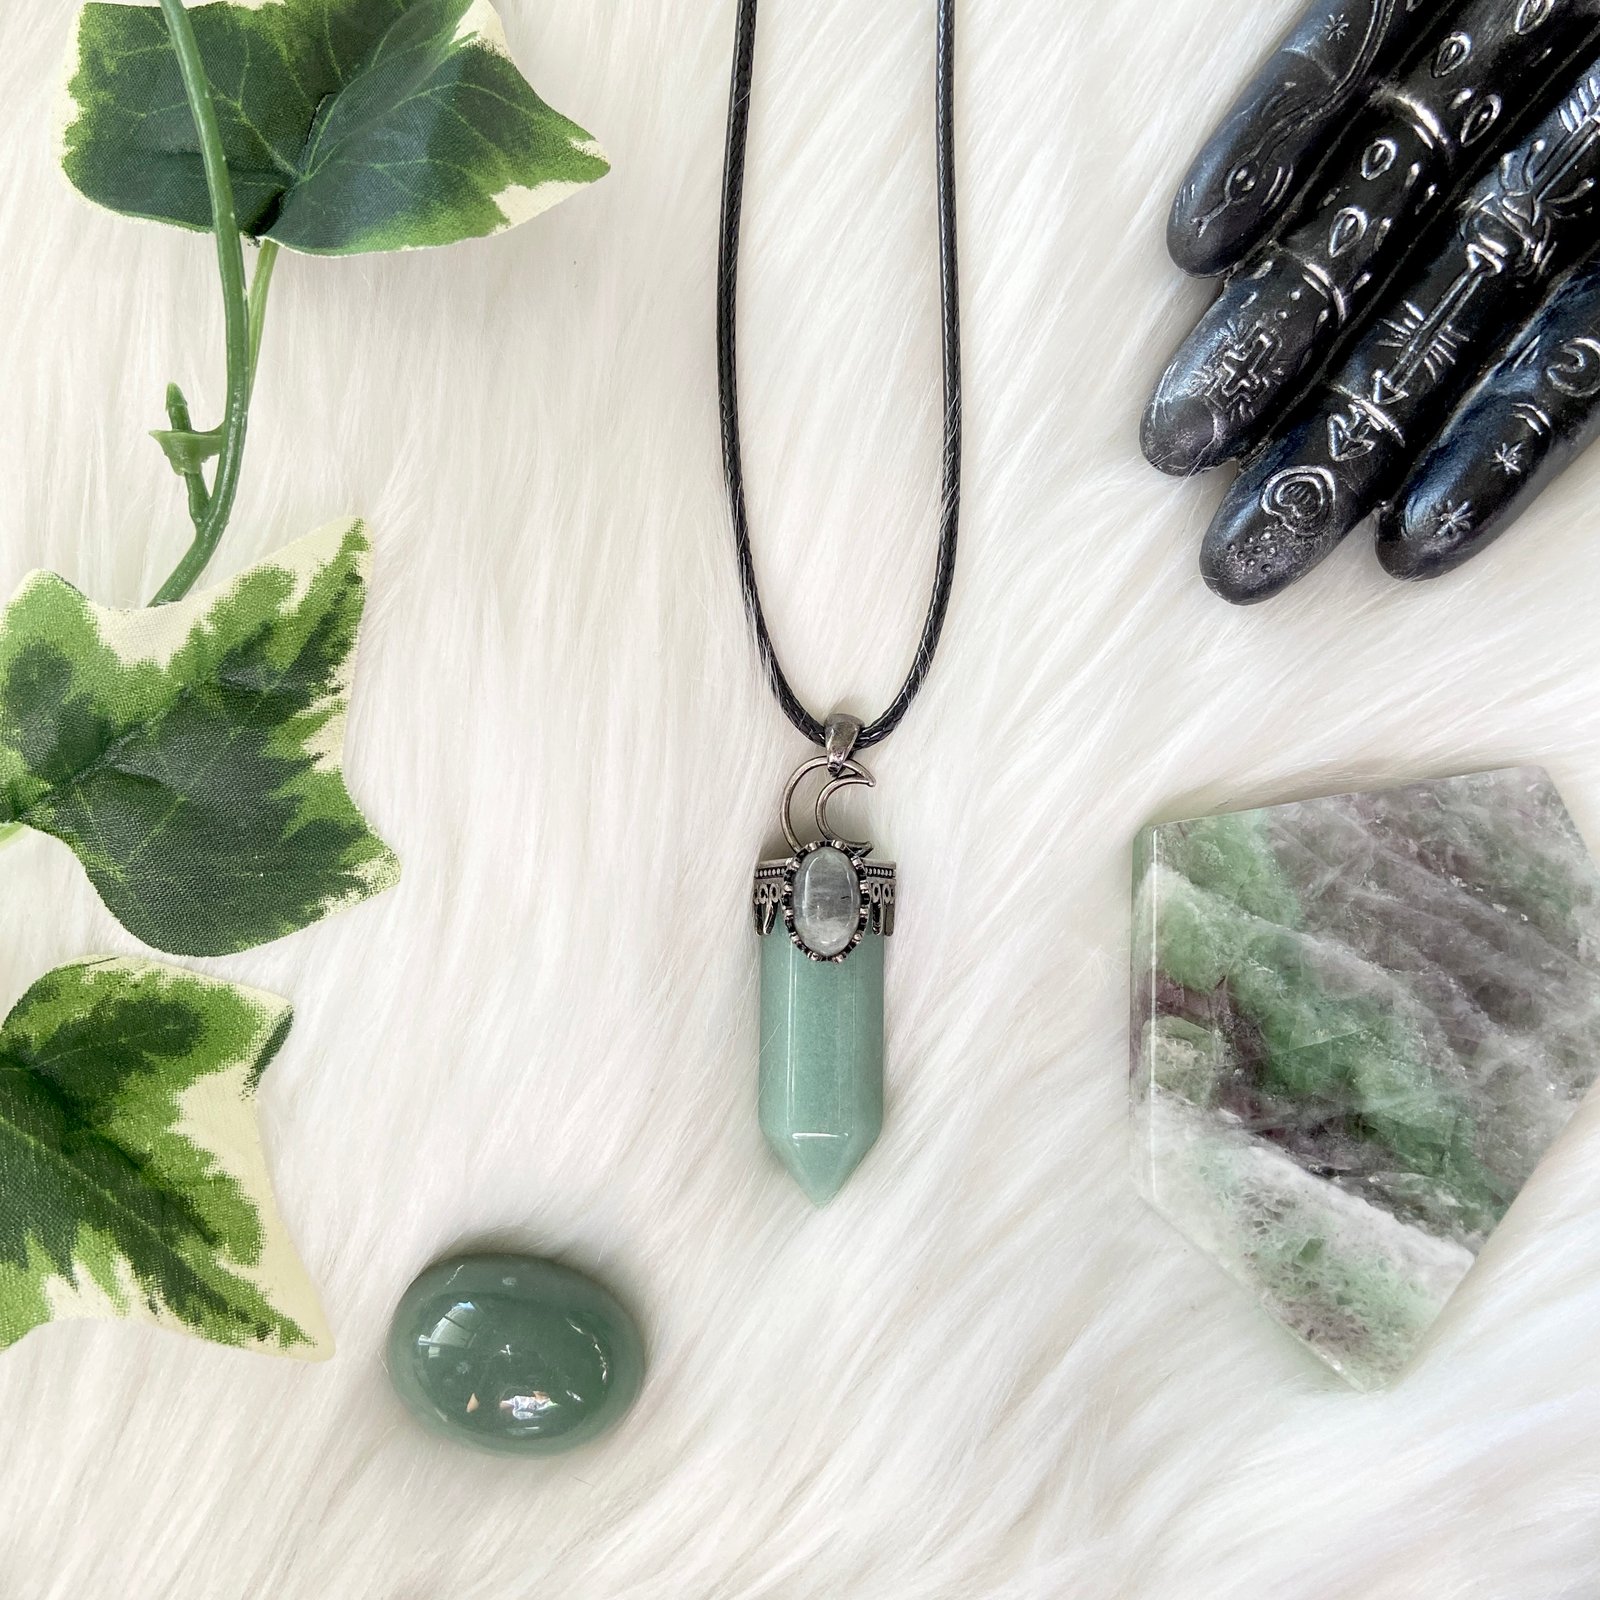 Men's Crystal Necklace, Green Aventurine Slab Pendant Necklace, Natural Stone  Necklace, Braided adjustable Necklace, gift for him